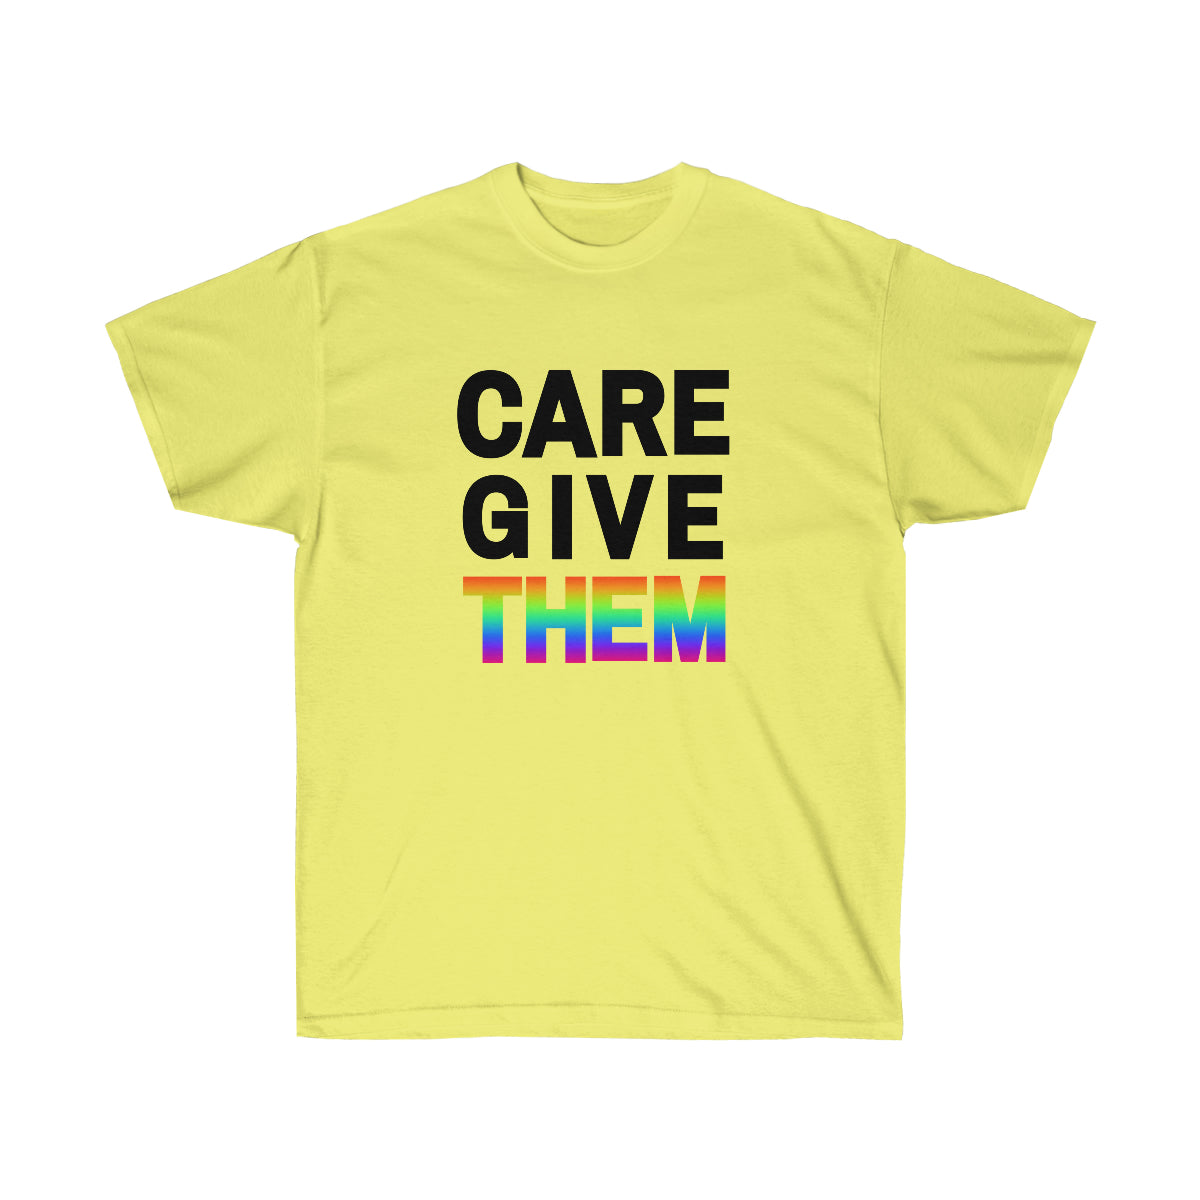 CARE GIVE THEM Tee